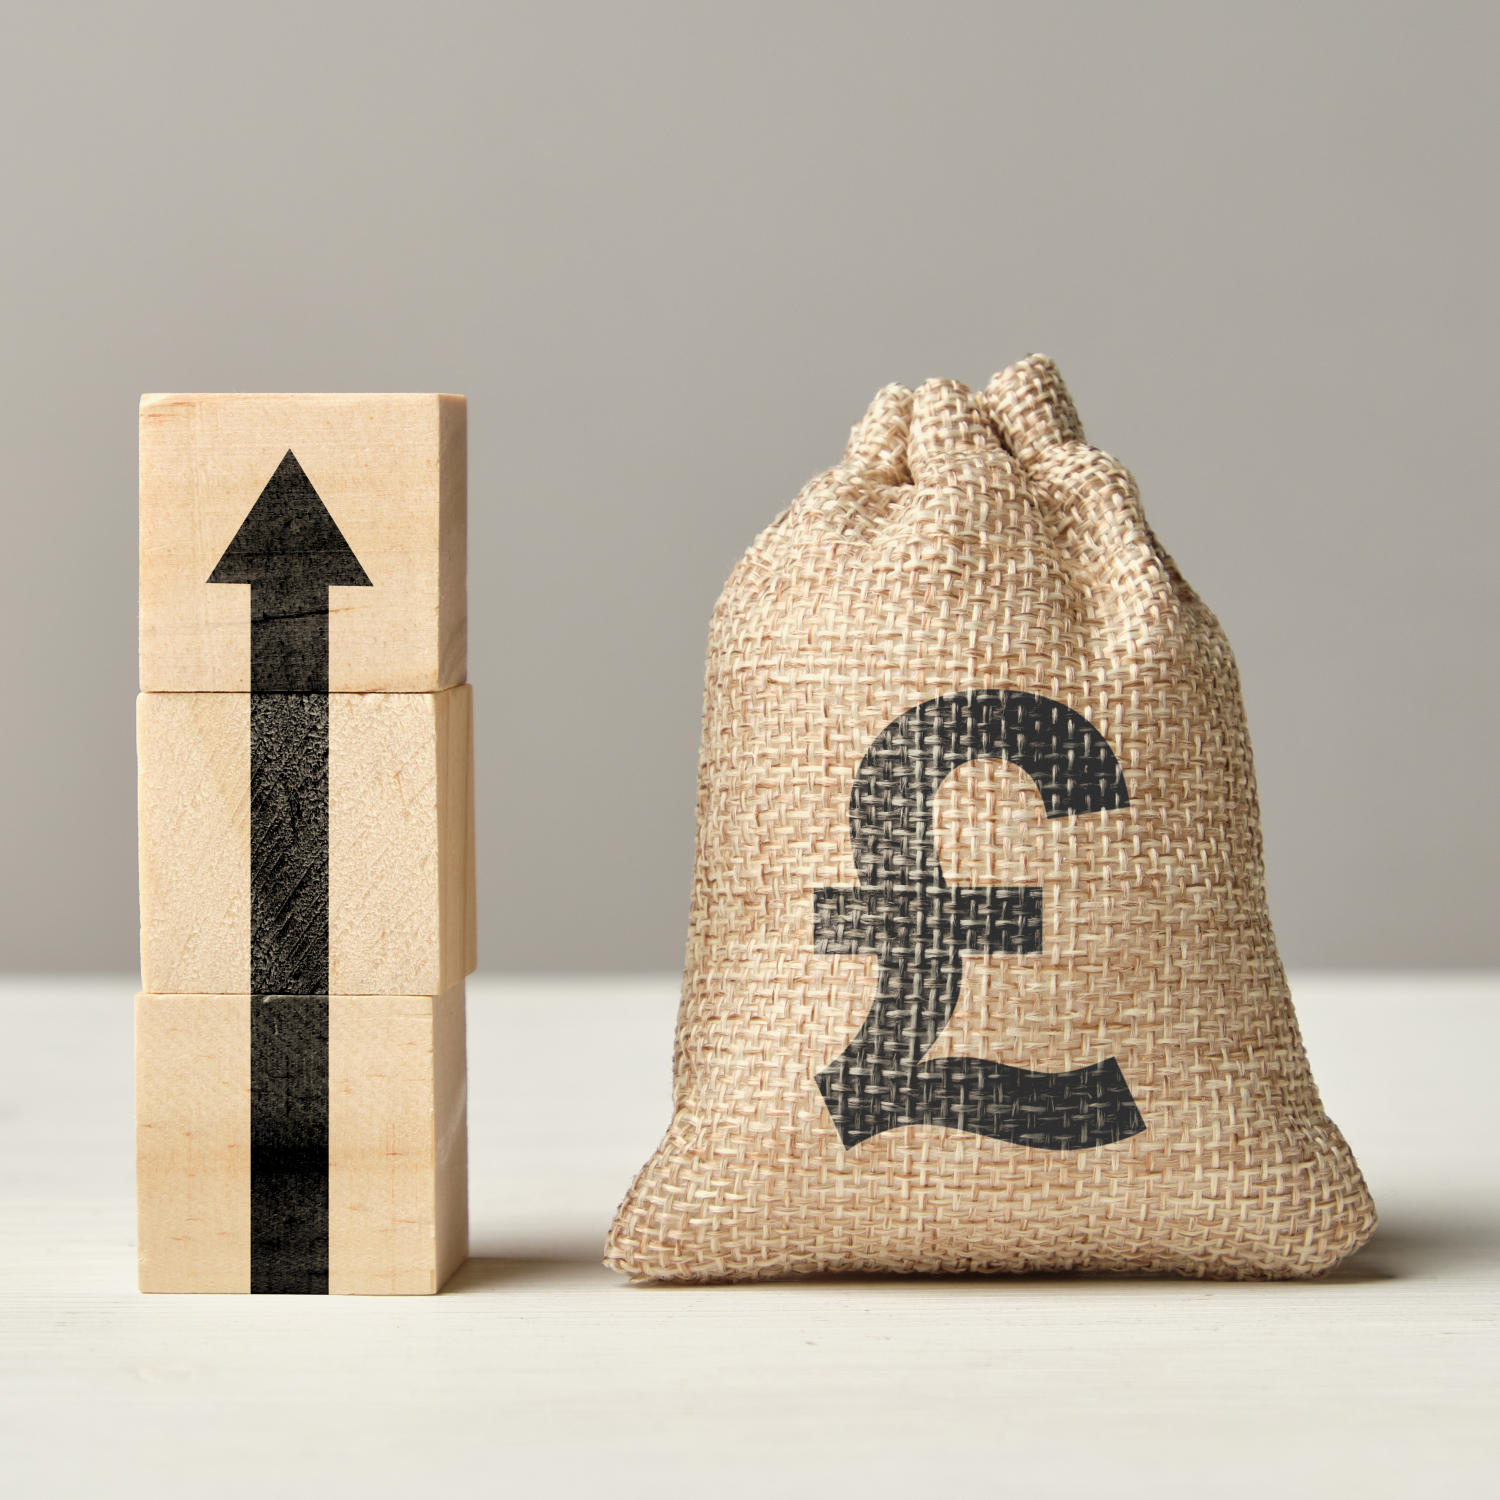 Pound sterling currency growth concept with up arrow and money bag